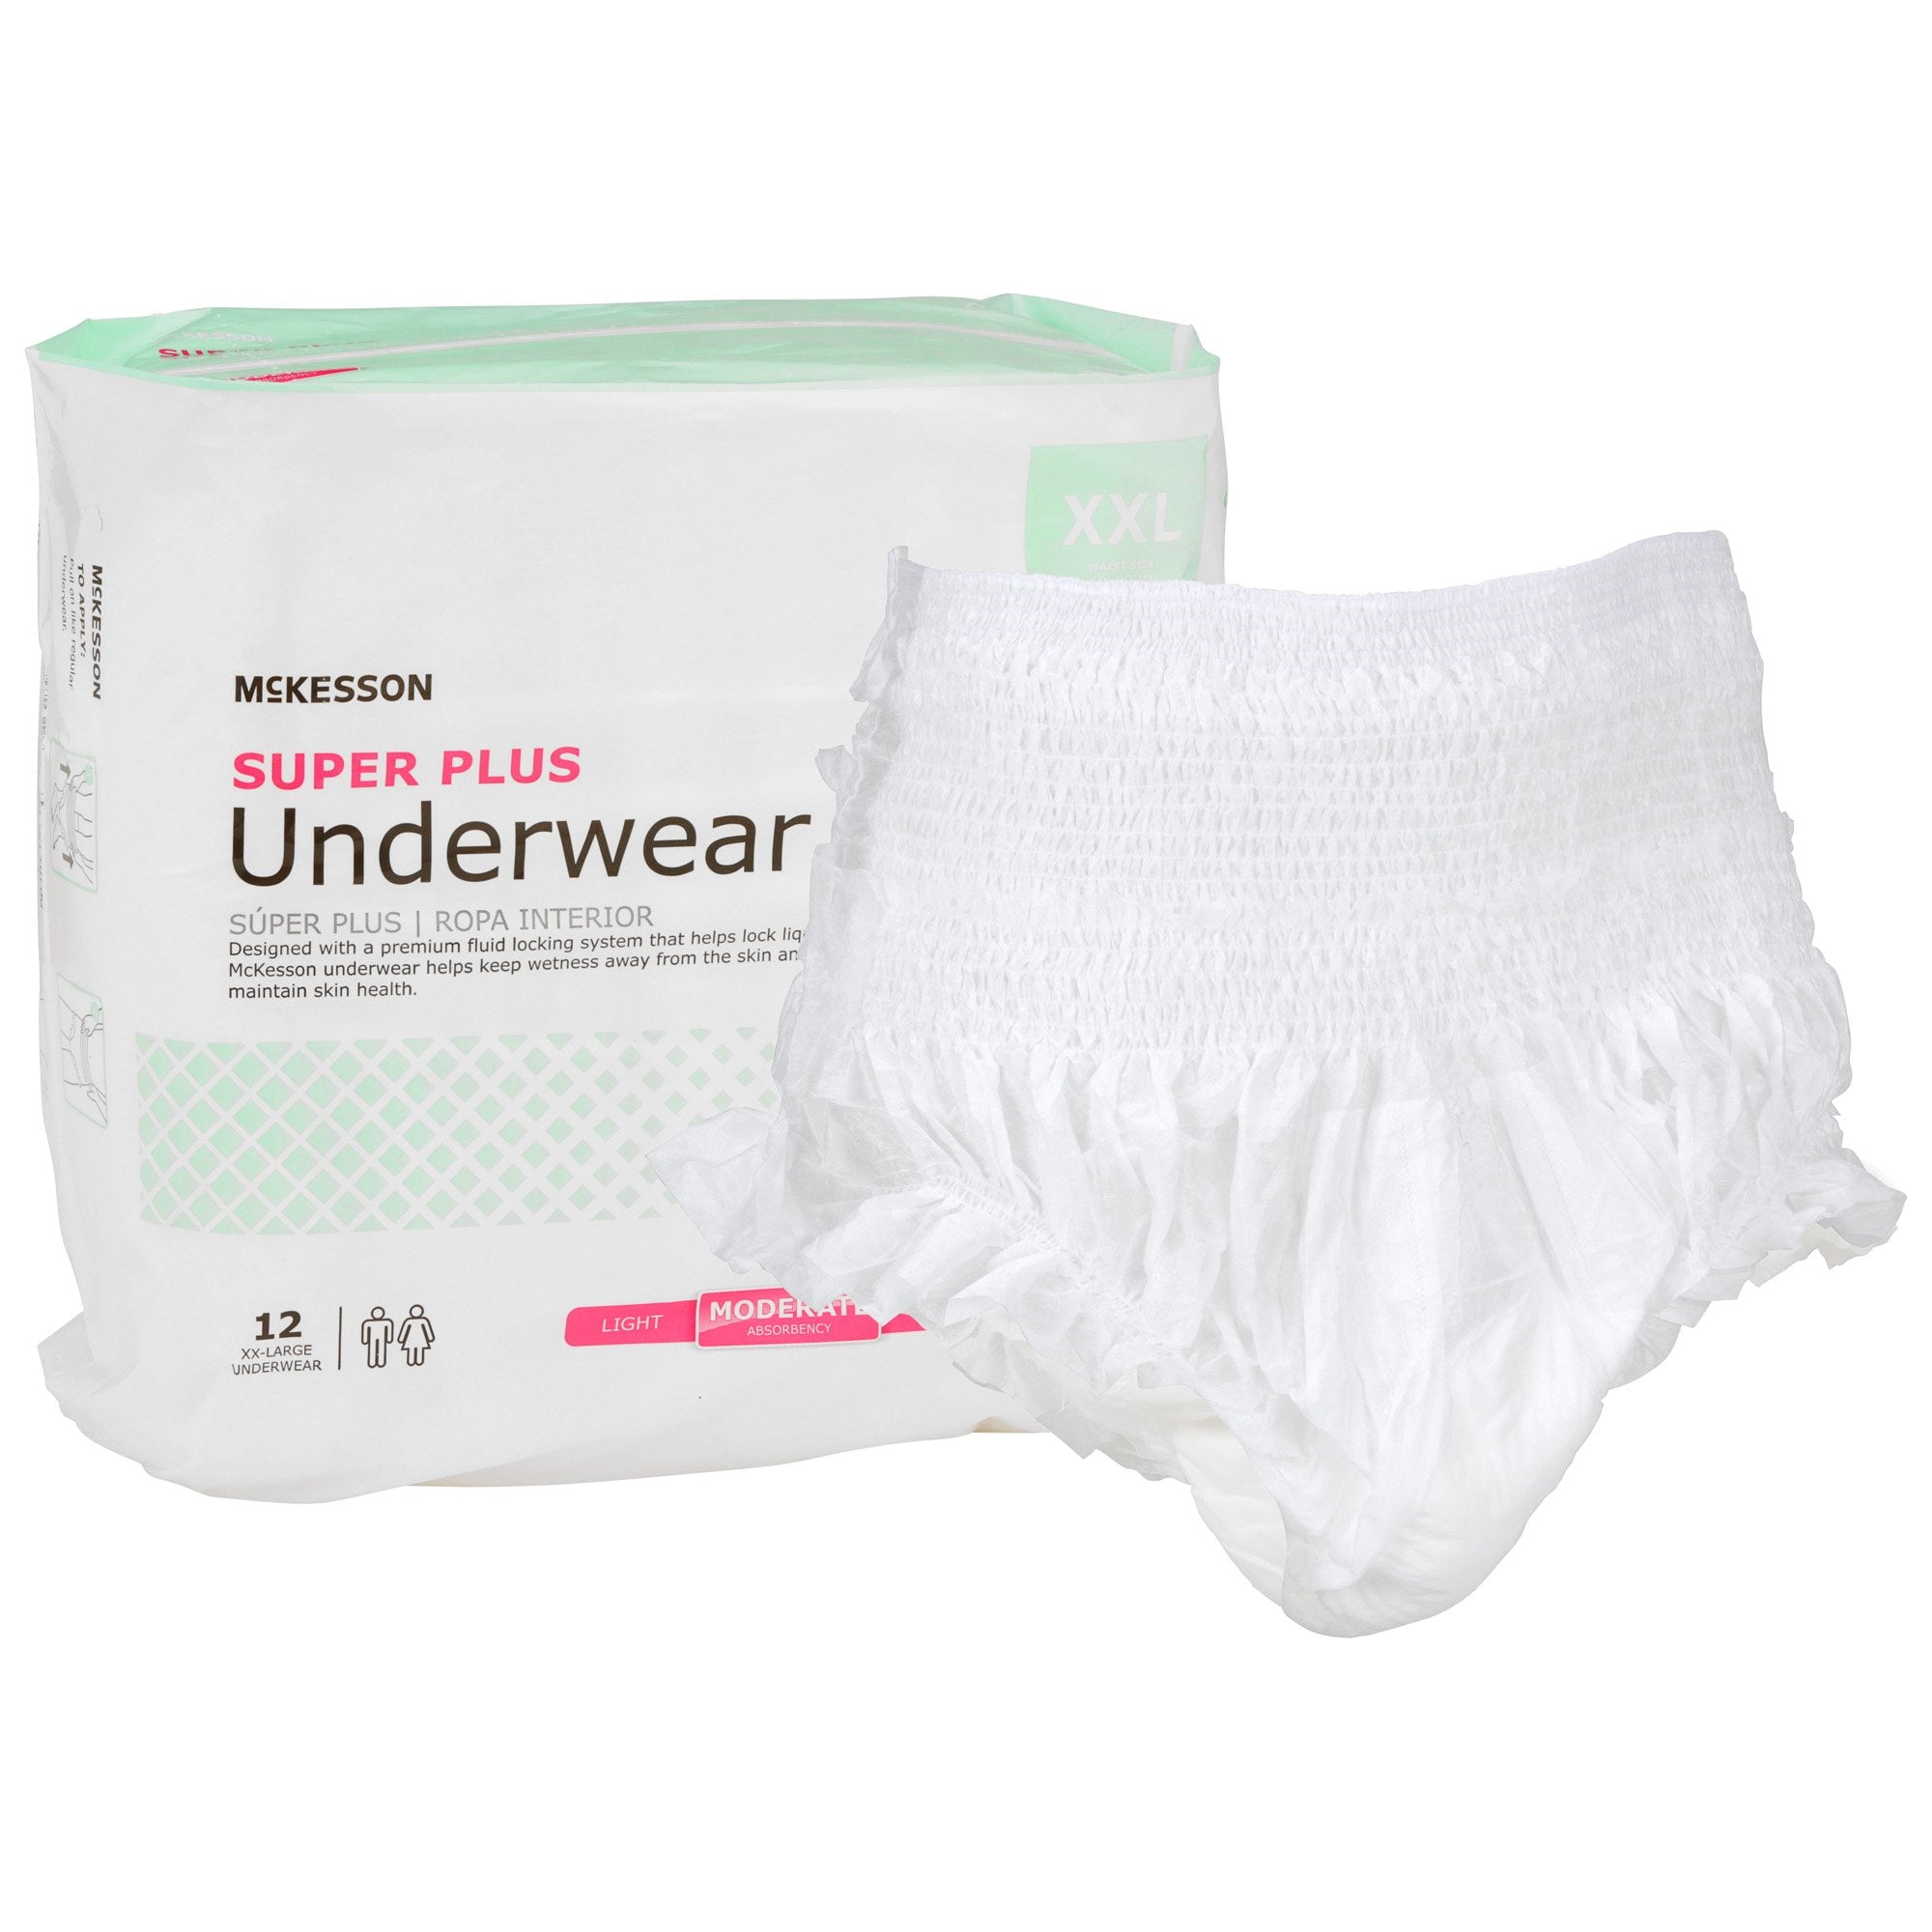 Simplicity Unisex Adult Disposable Underwear, Pull On, Moderate Absorbency